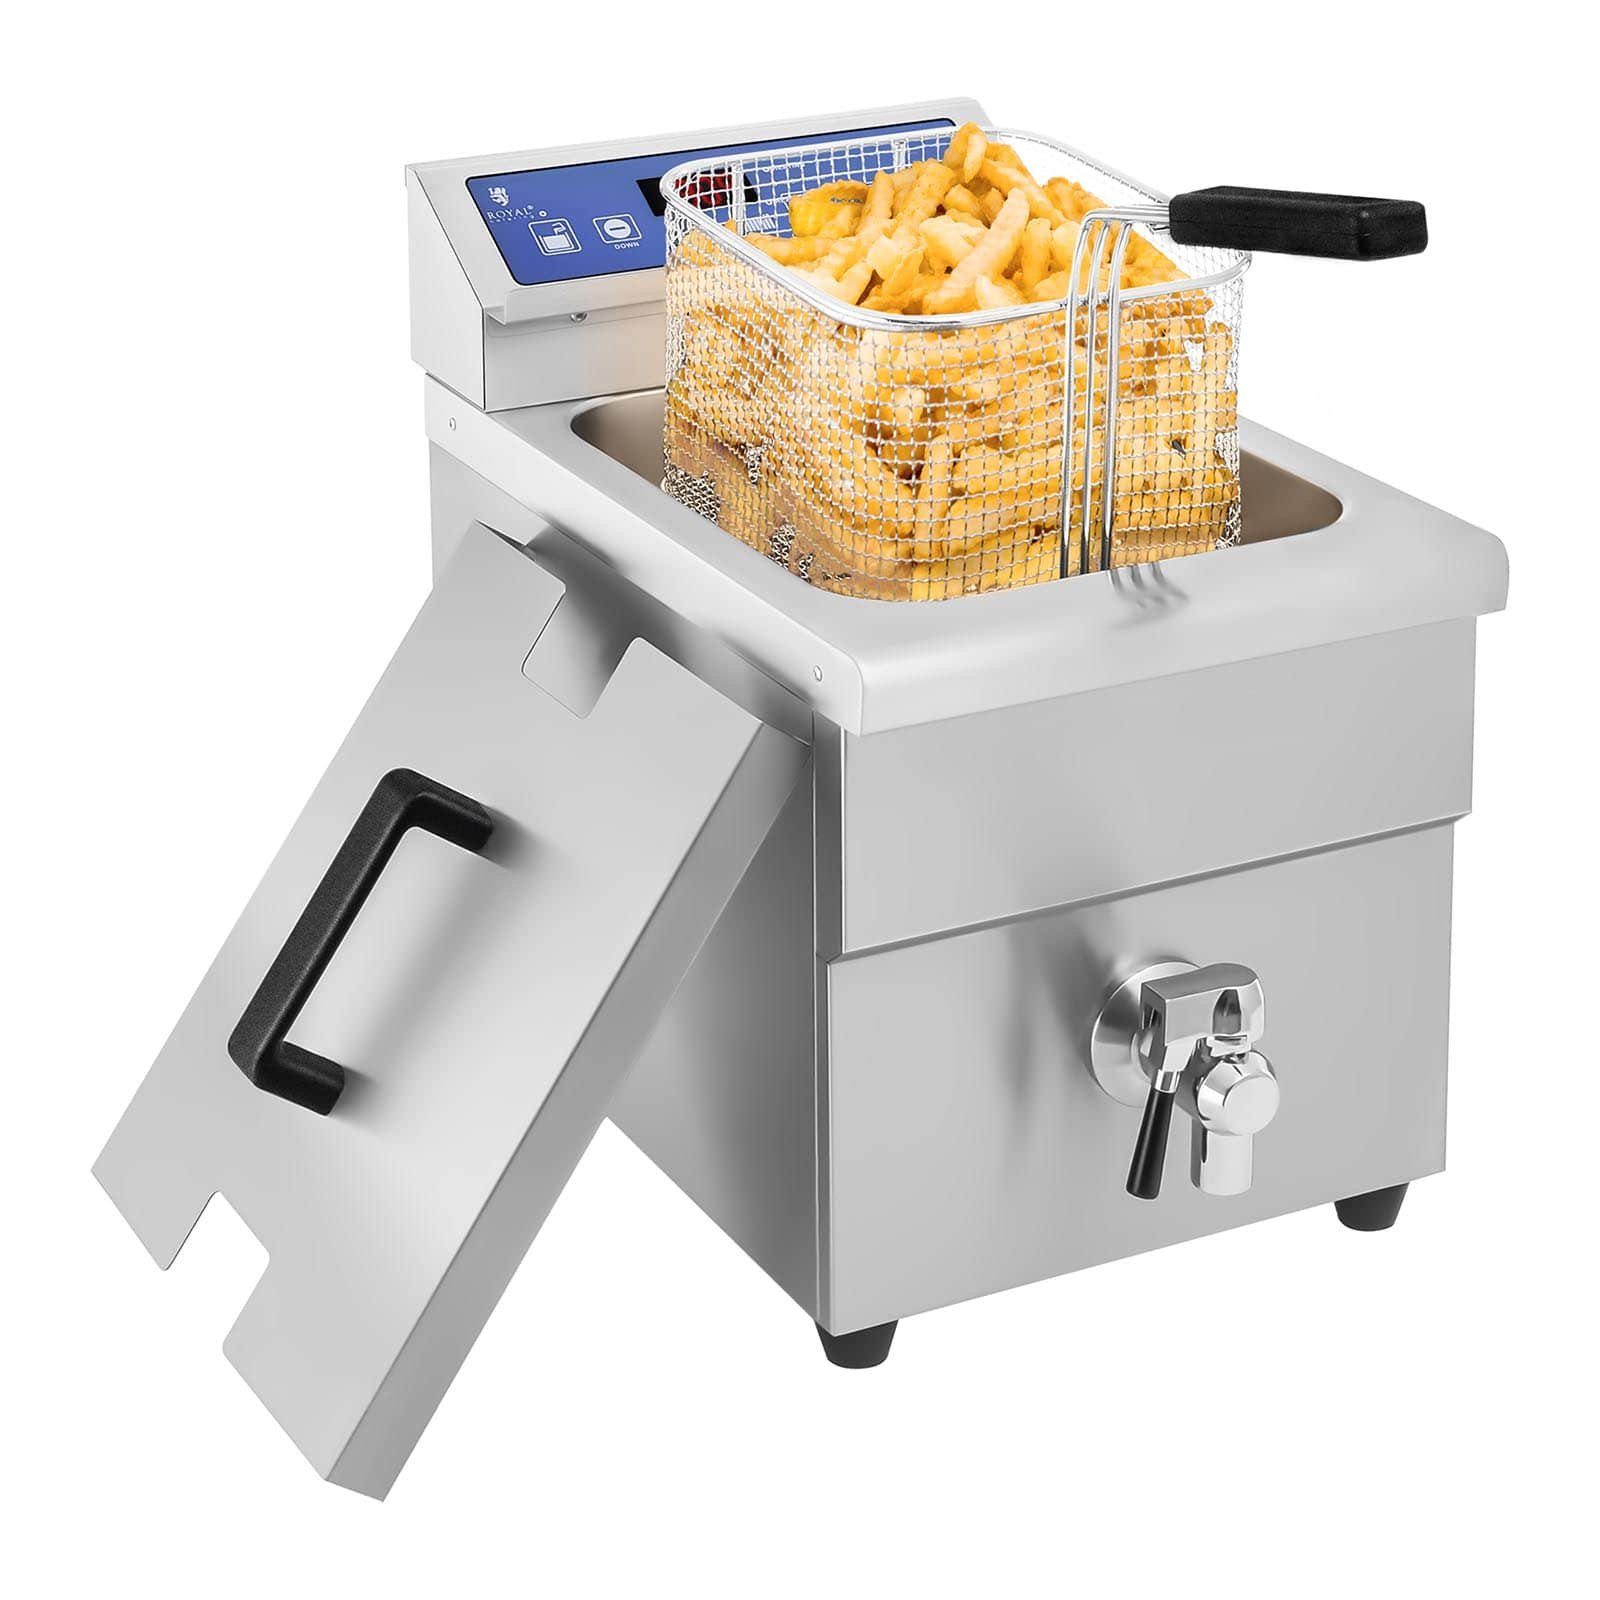 Royal 10 Induktionsfritteuse W Elektro, Fritteuse Catering 3500 Friteuse L Fritteuse Fritöse